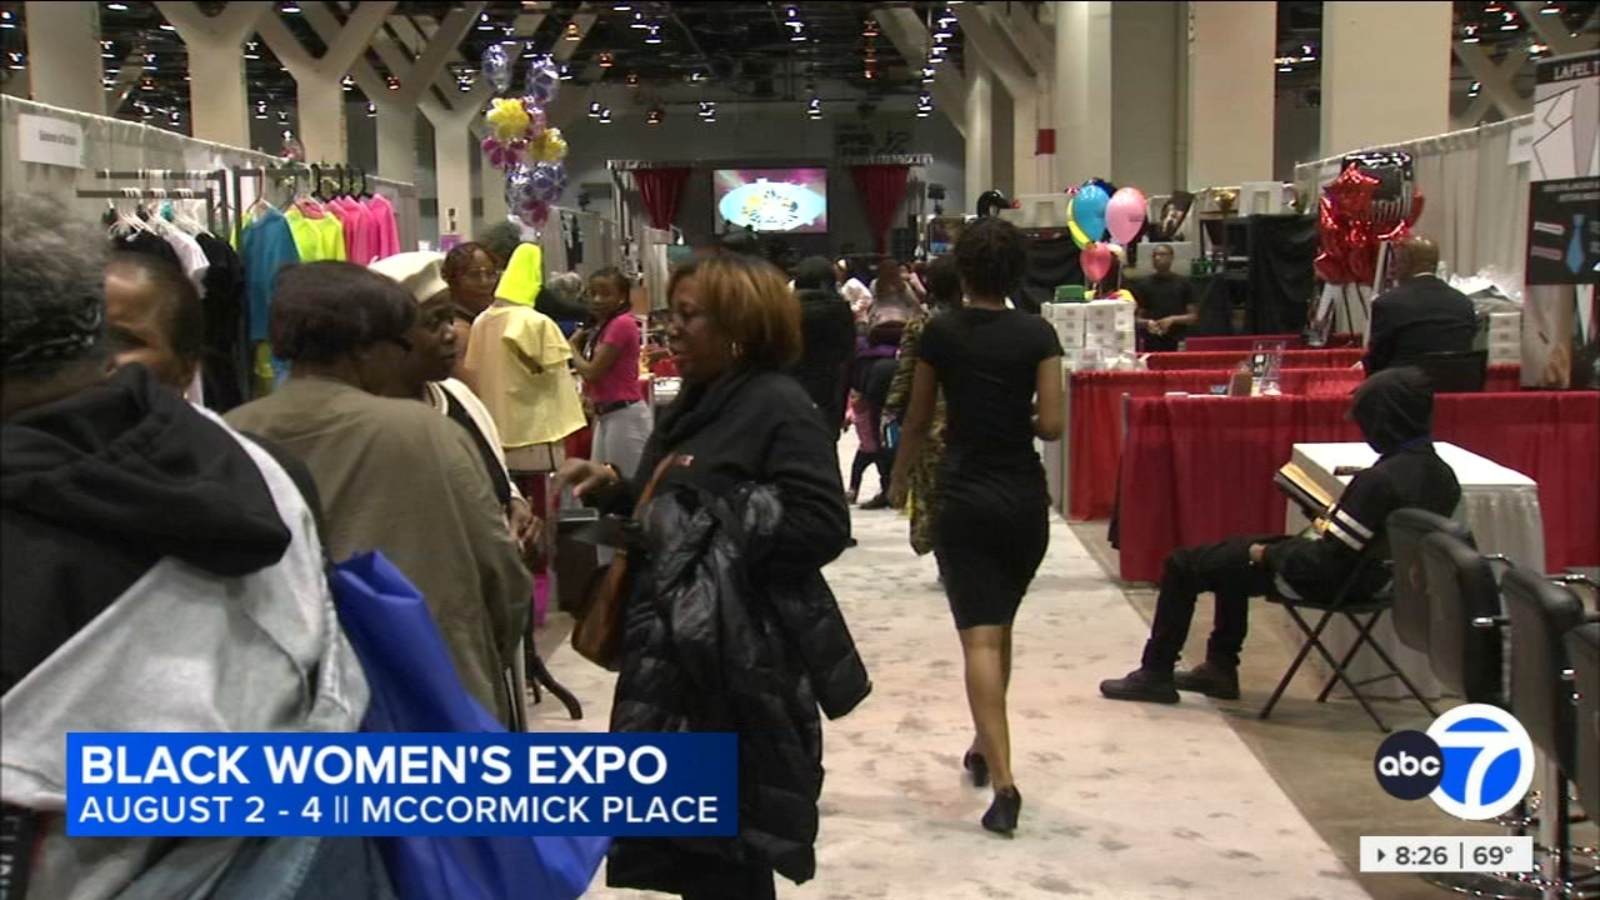 Black Women’s Expo Chicago to celebrate 29th anniversary at McCormick Place [Video]